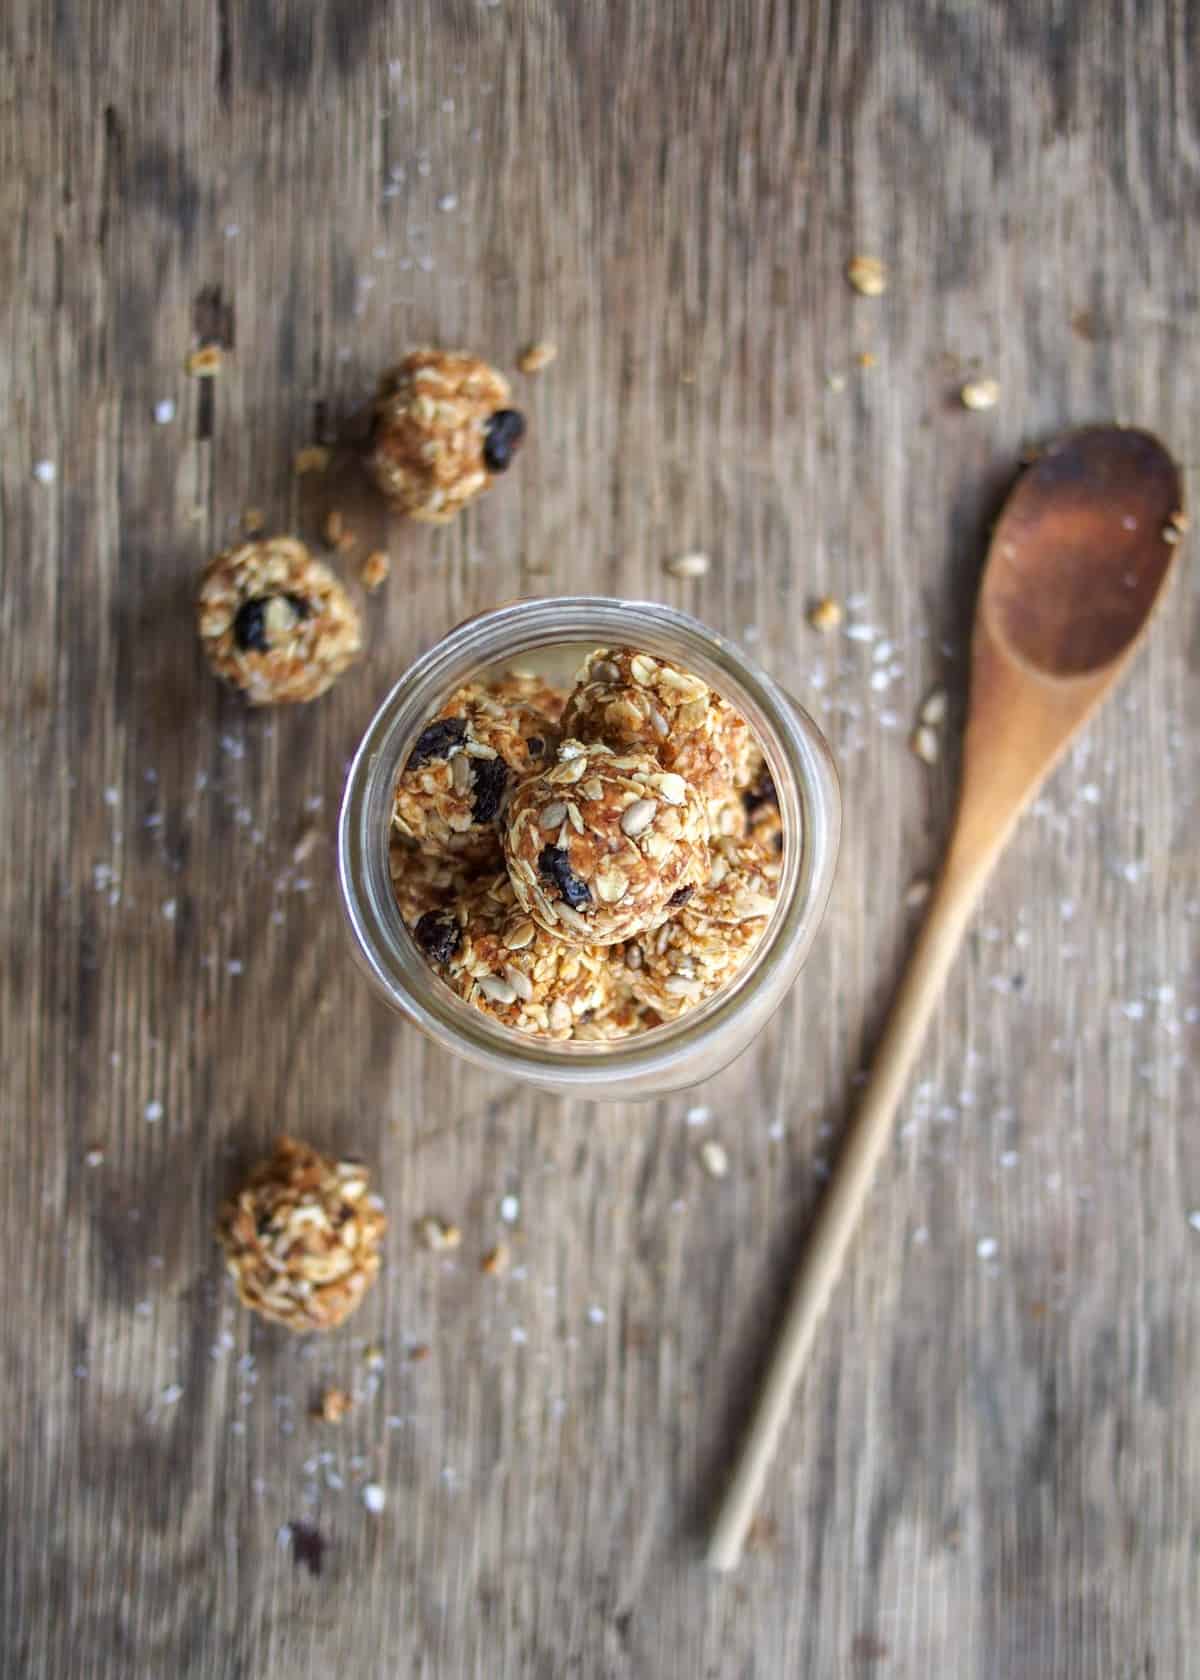 100 calorie peanut butter energy balls with wooden spoon